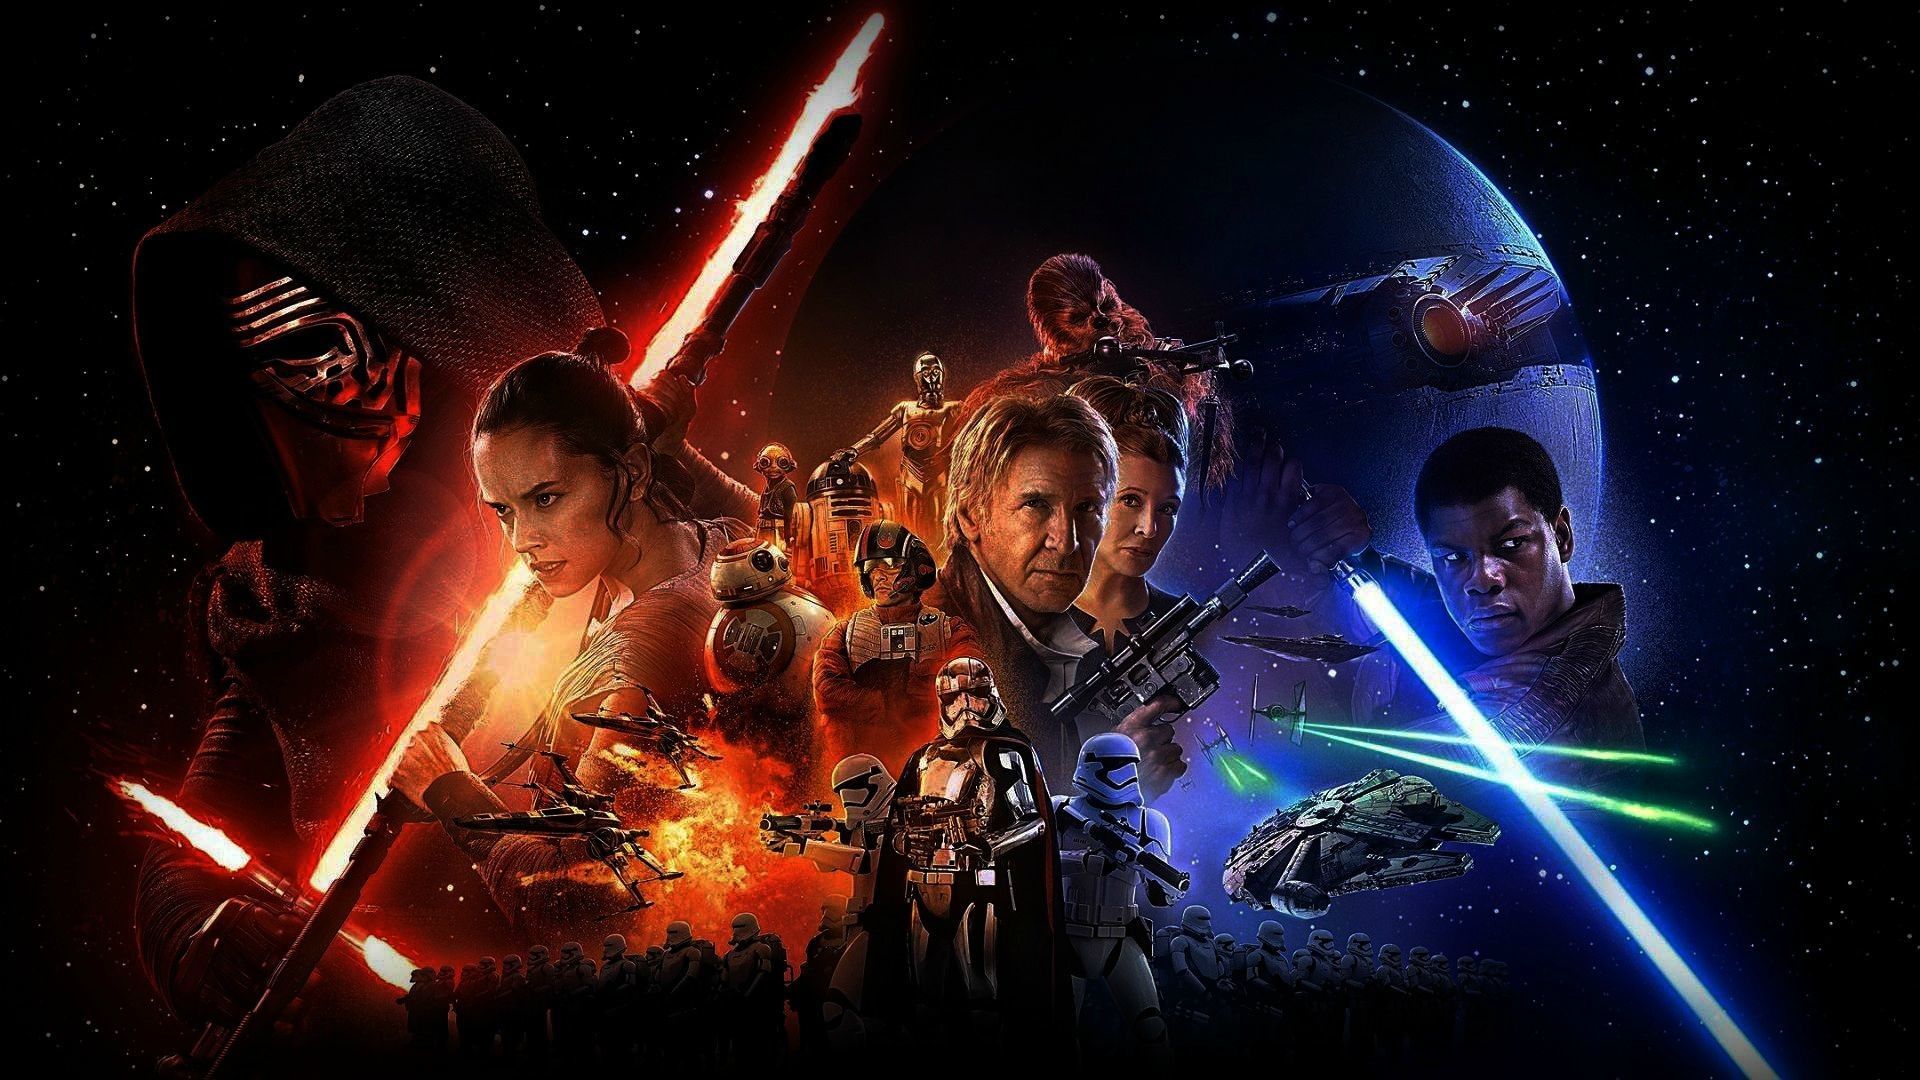 The Force Awakens Wallpaper Free The Force Awakens Background